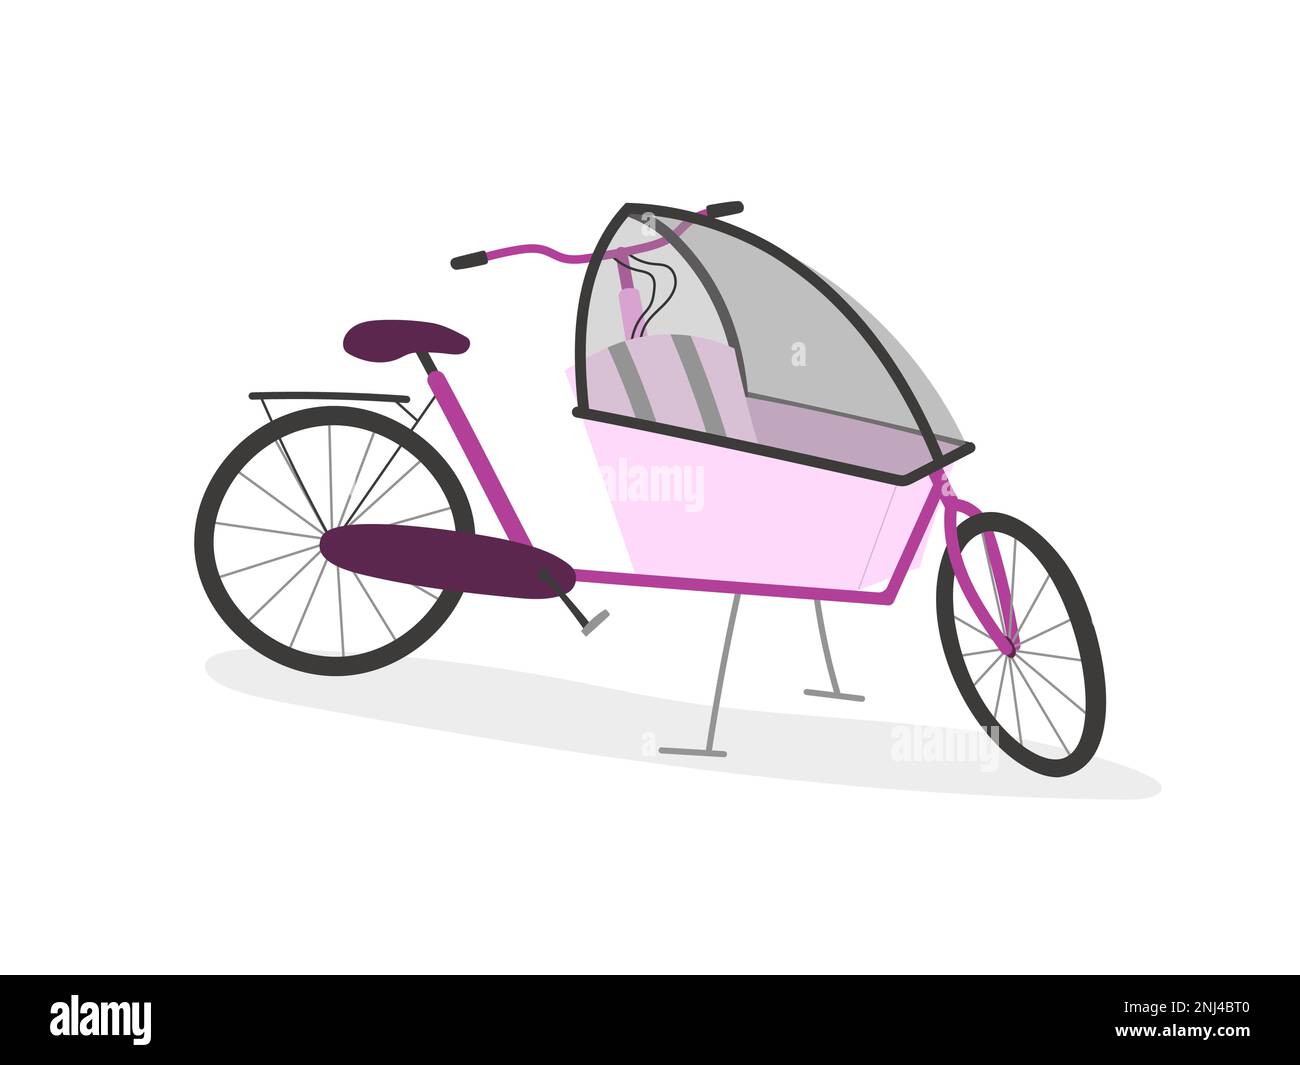 Parent cargo bike with children sit covered with rain cover. Pink cartoon realistic bakfiets on white background. Stock Vector